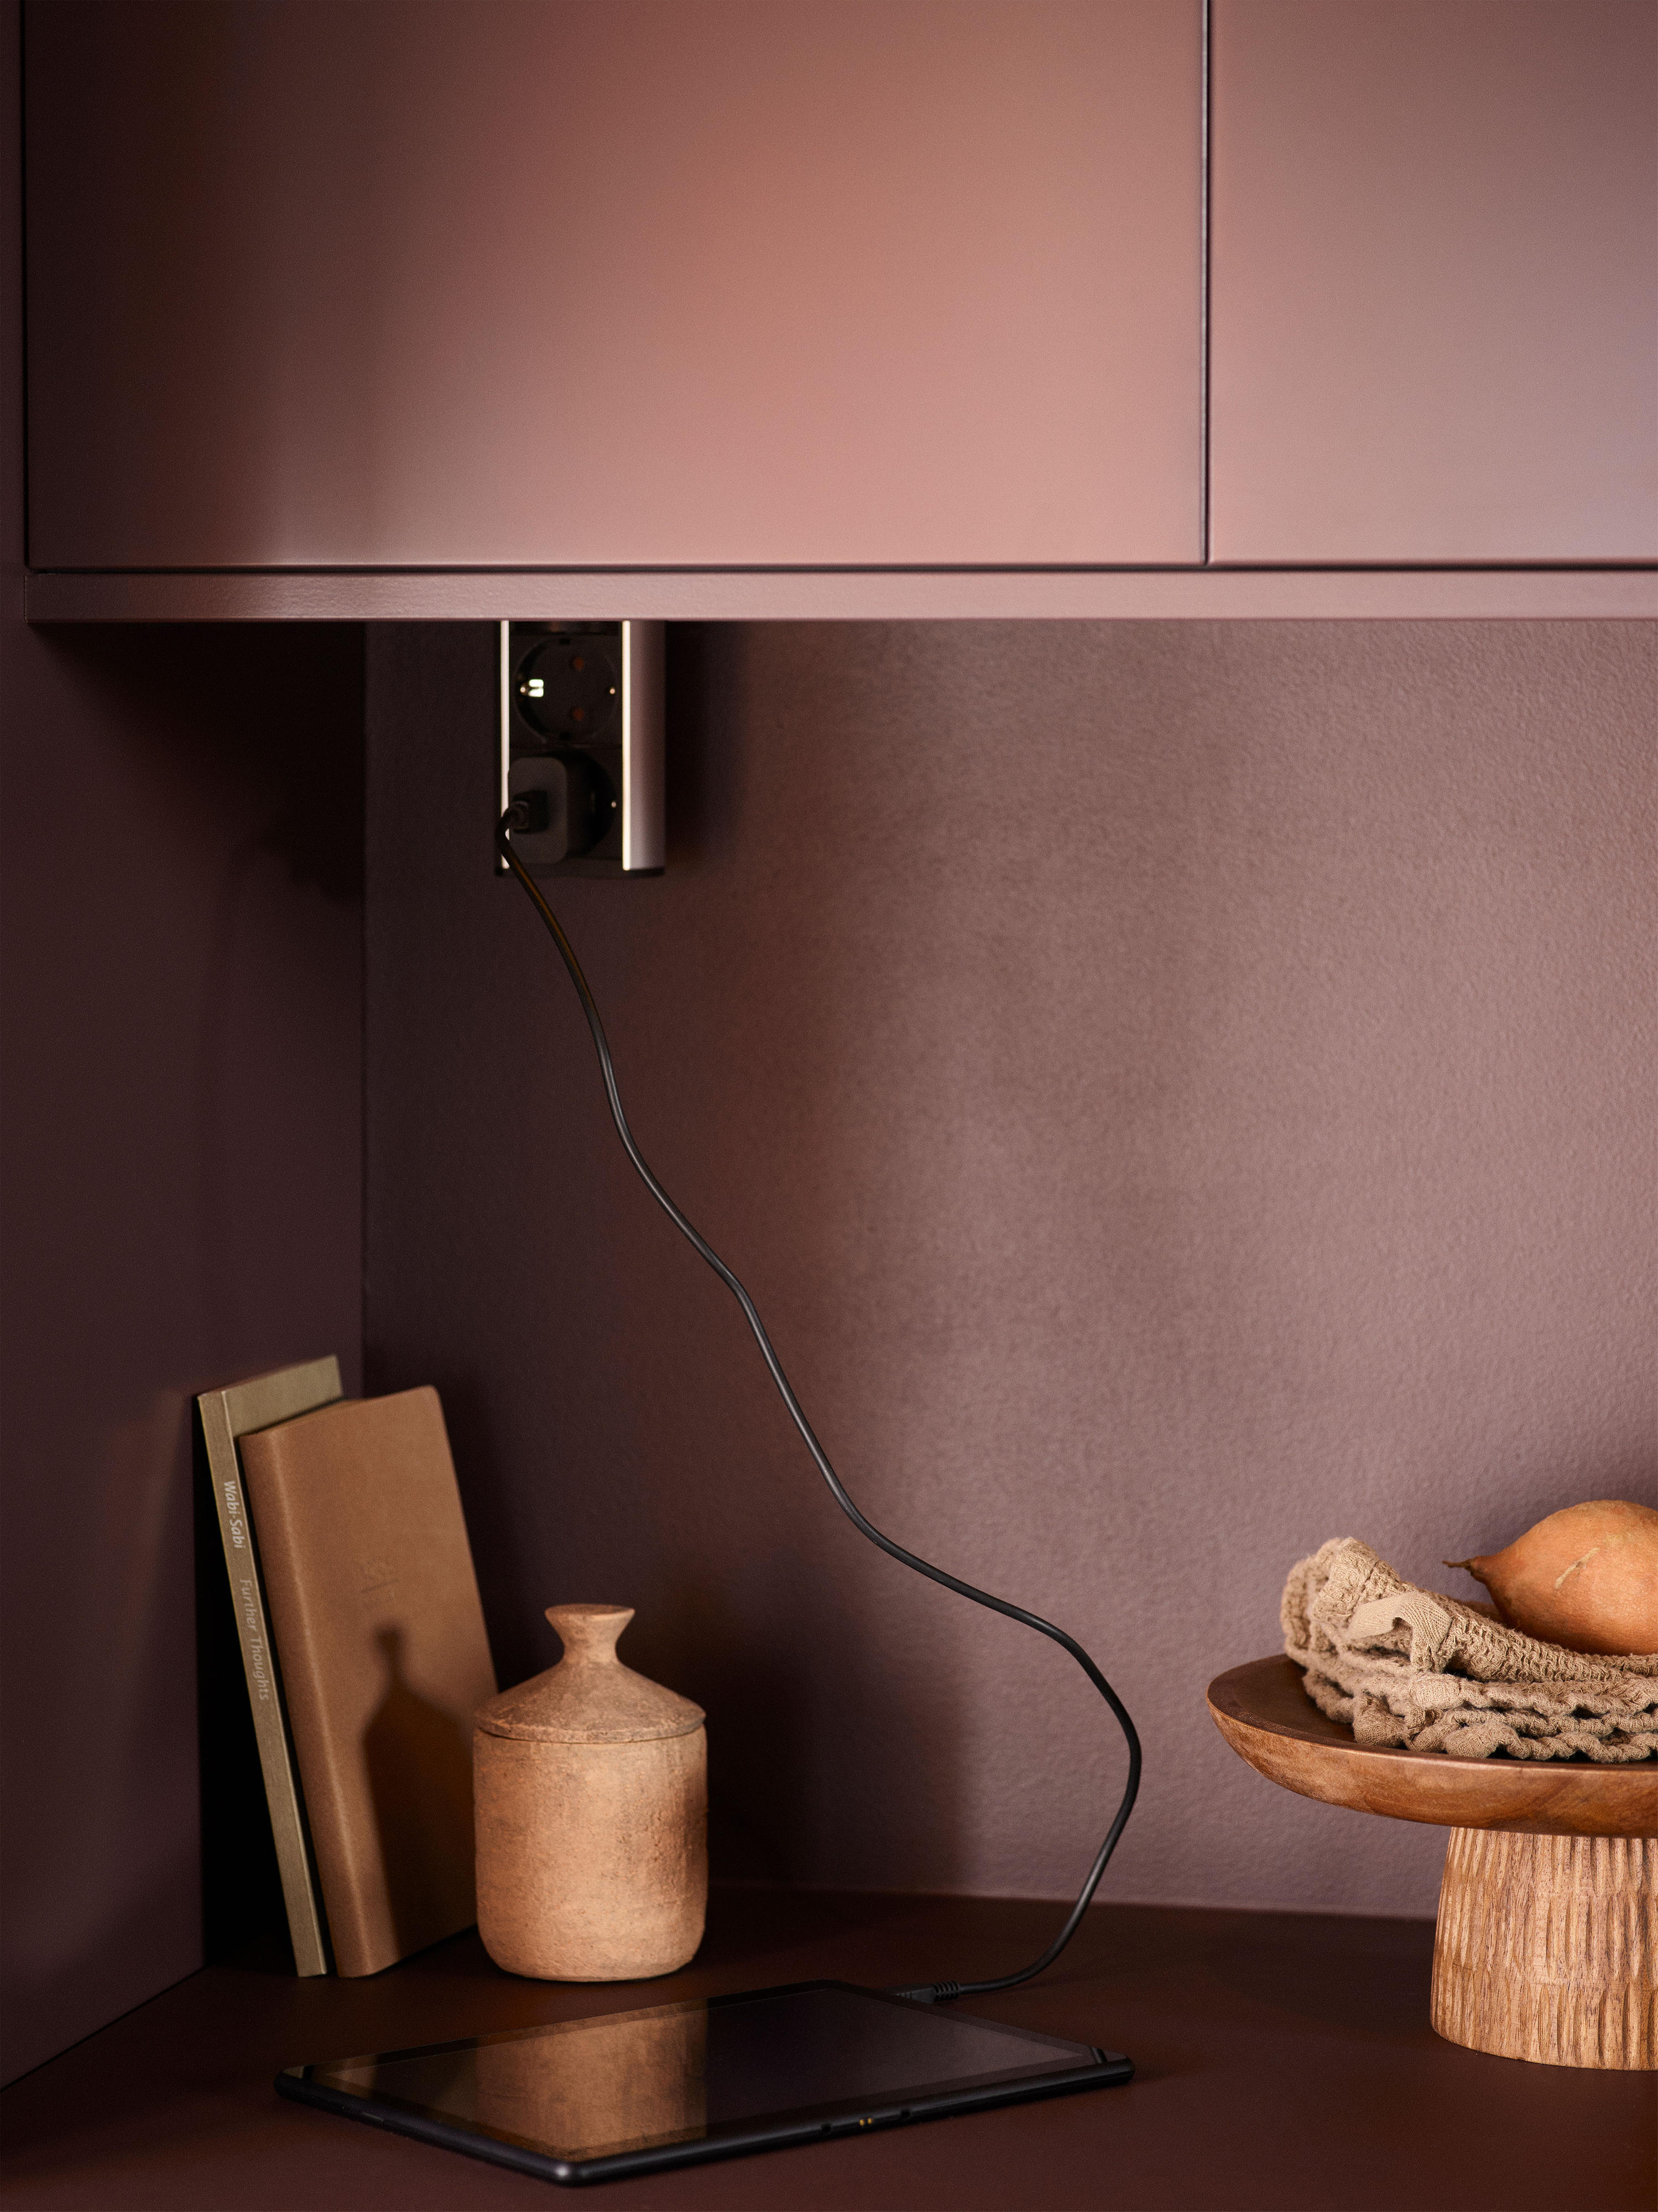 Epoq Trend Burgundy kitchen with cutting boards, electrical outlet, tablet and decorations